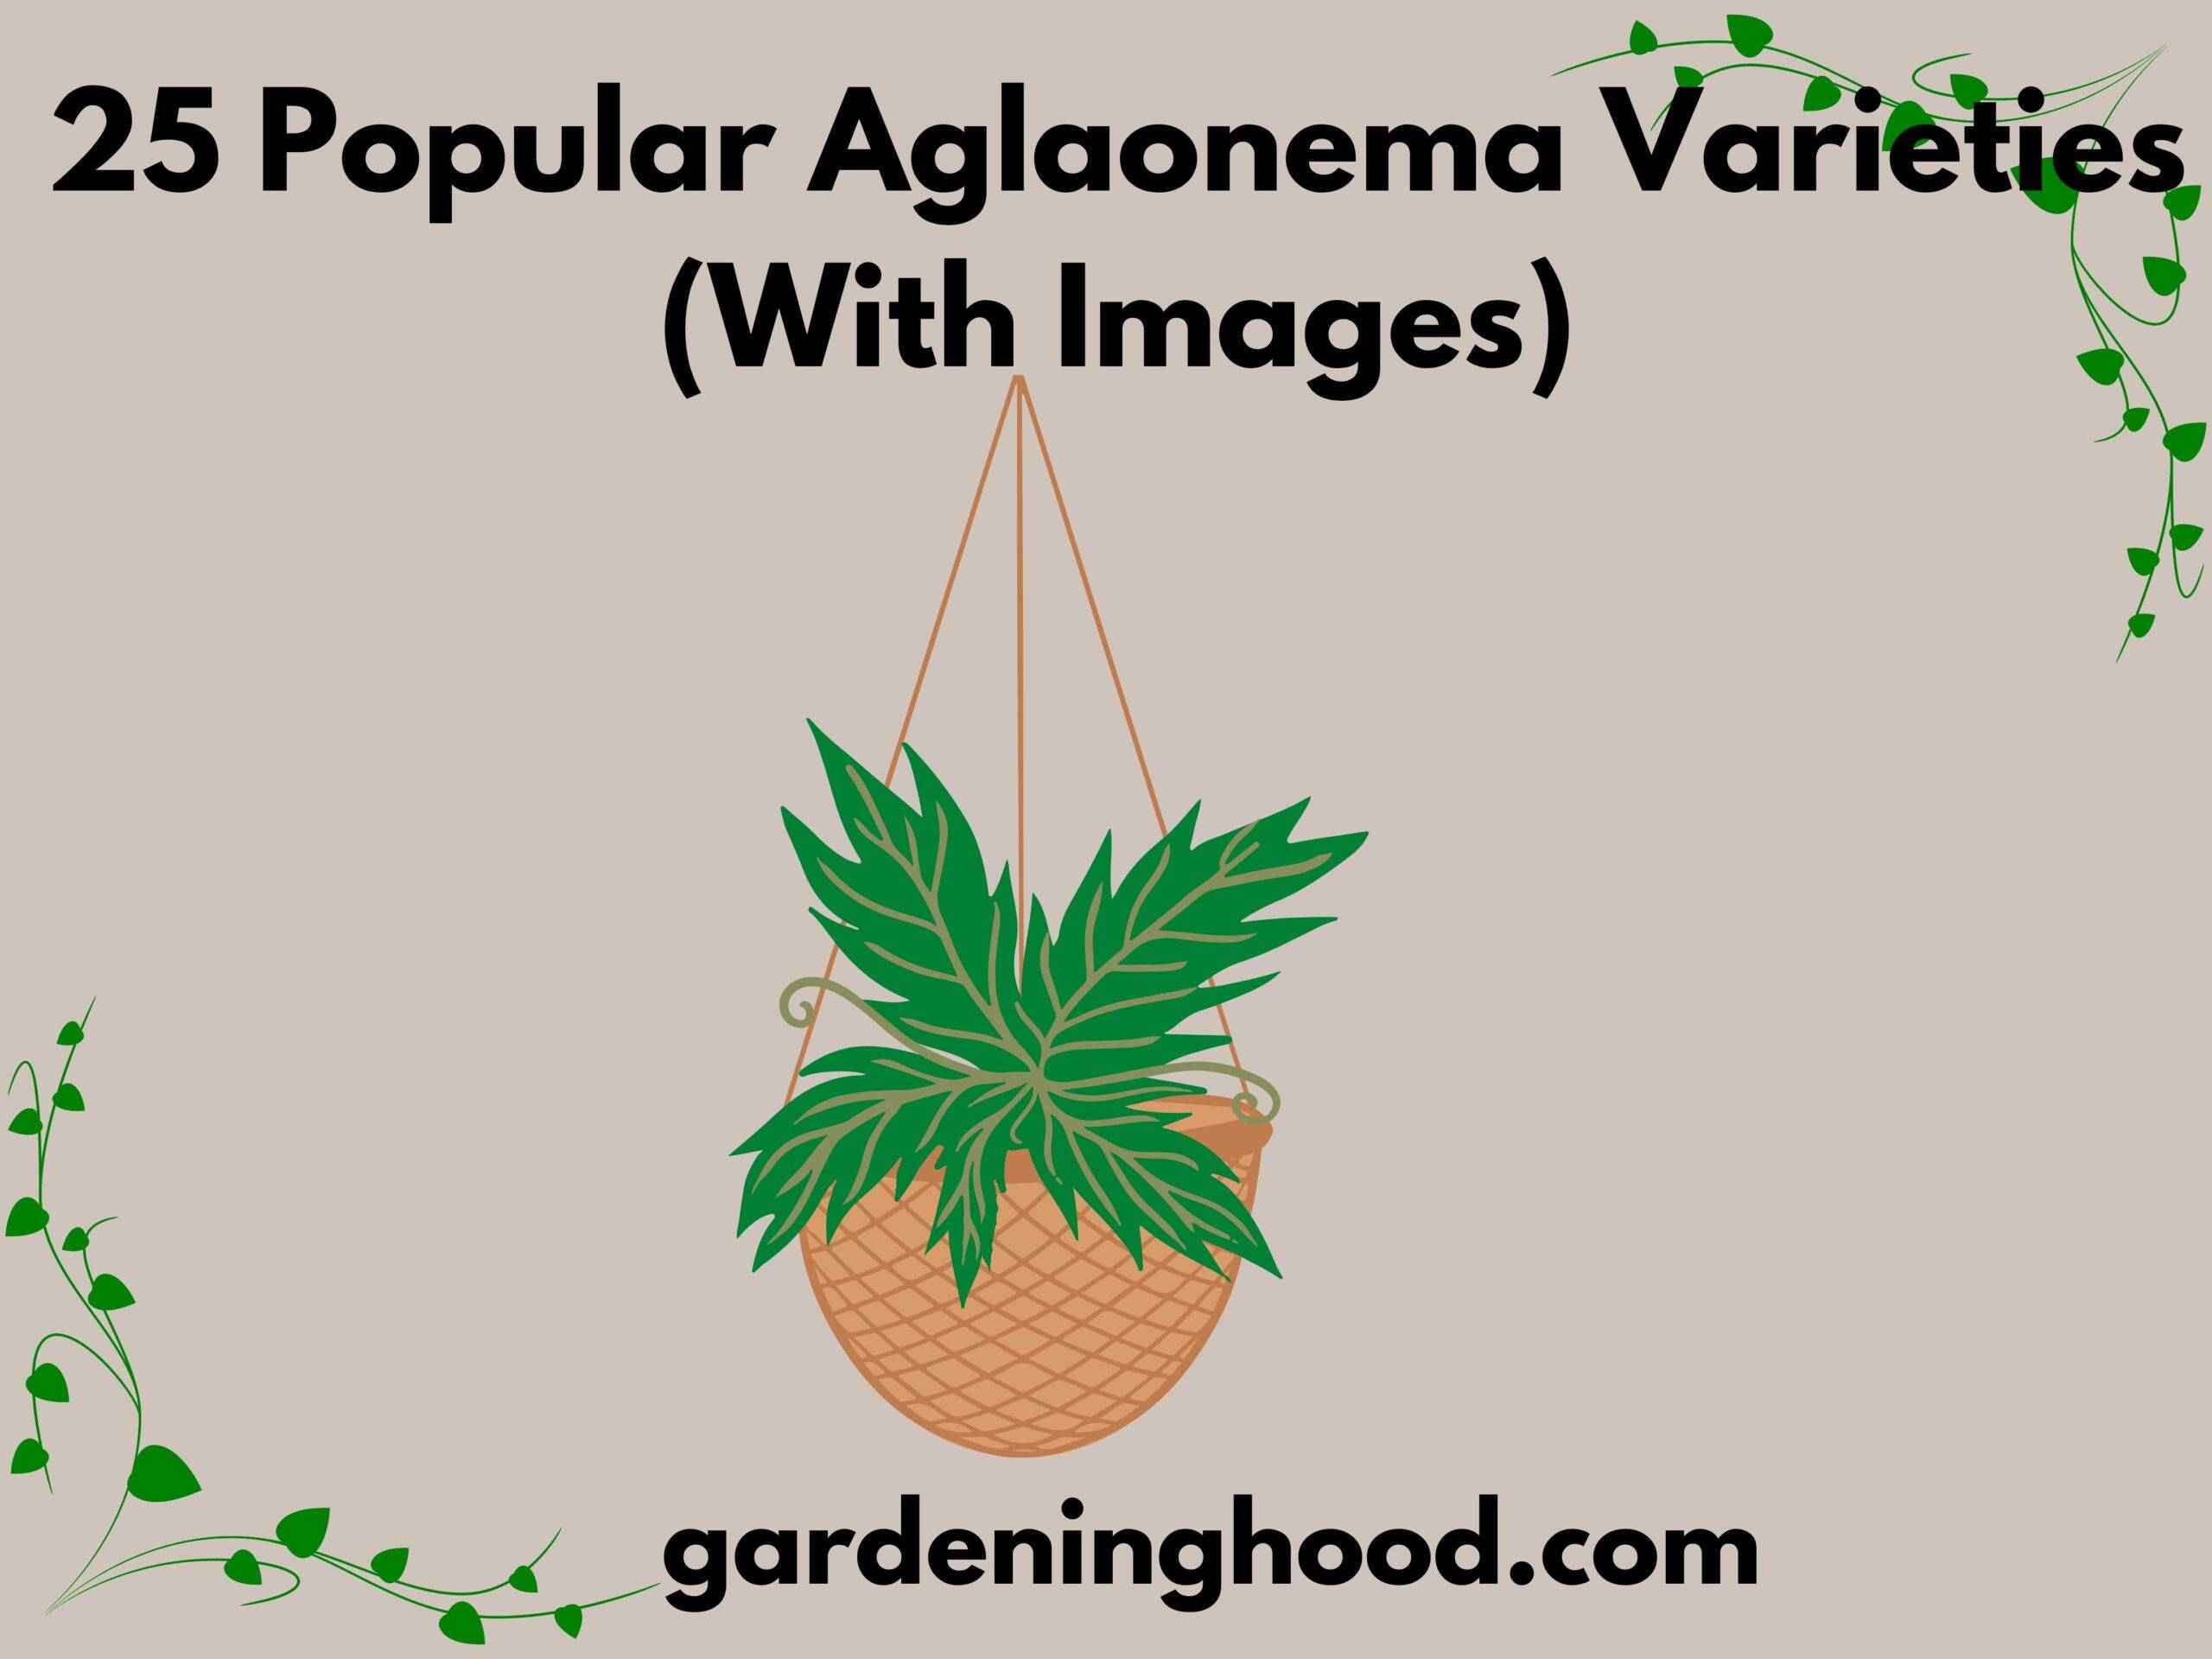 <strong>25 Popular Aglaonema Varieties (With Images)</strong>